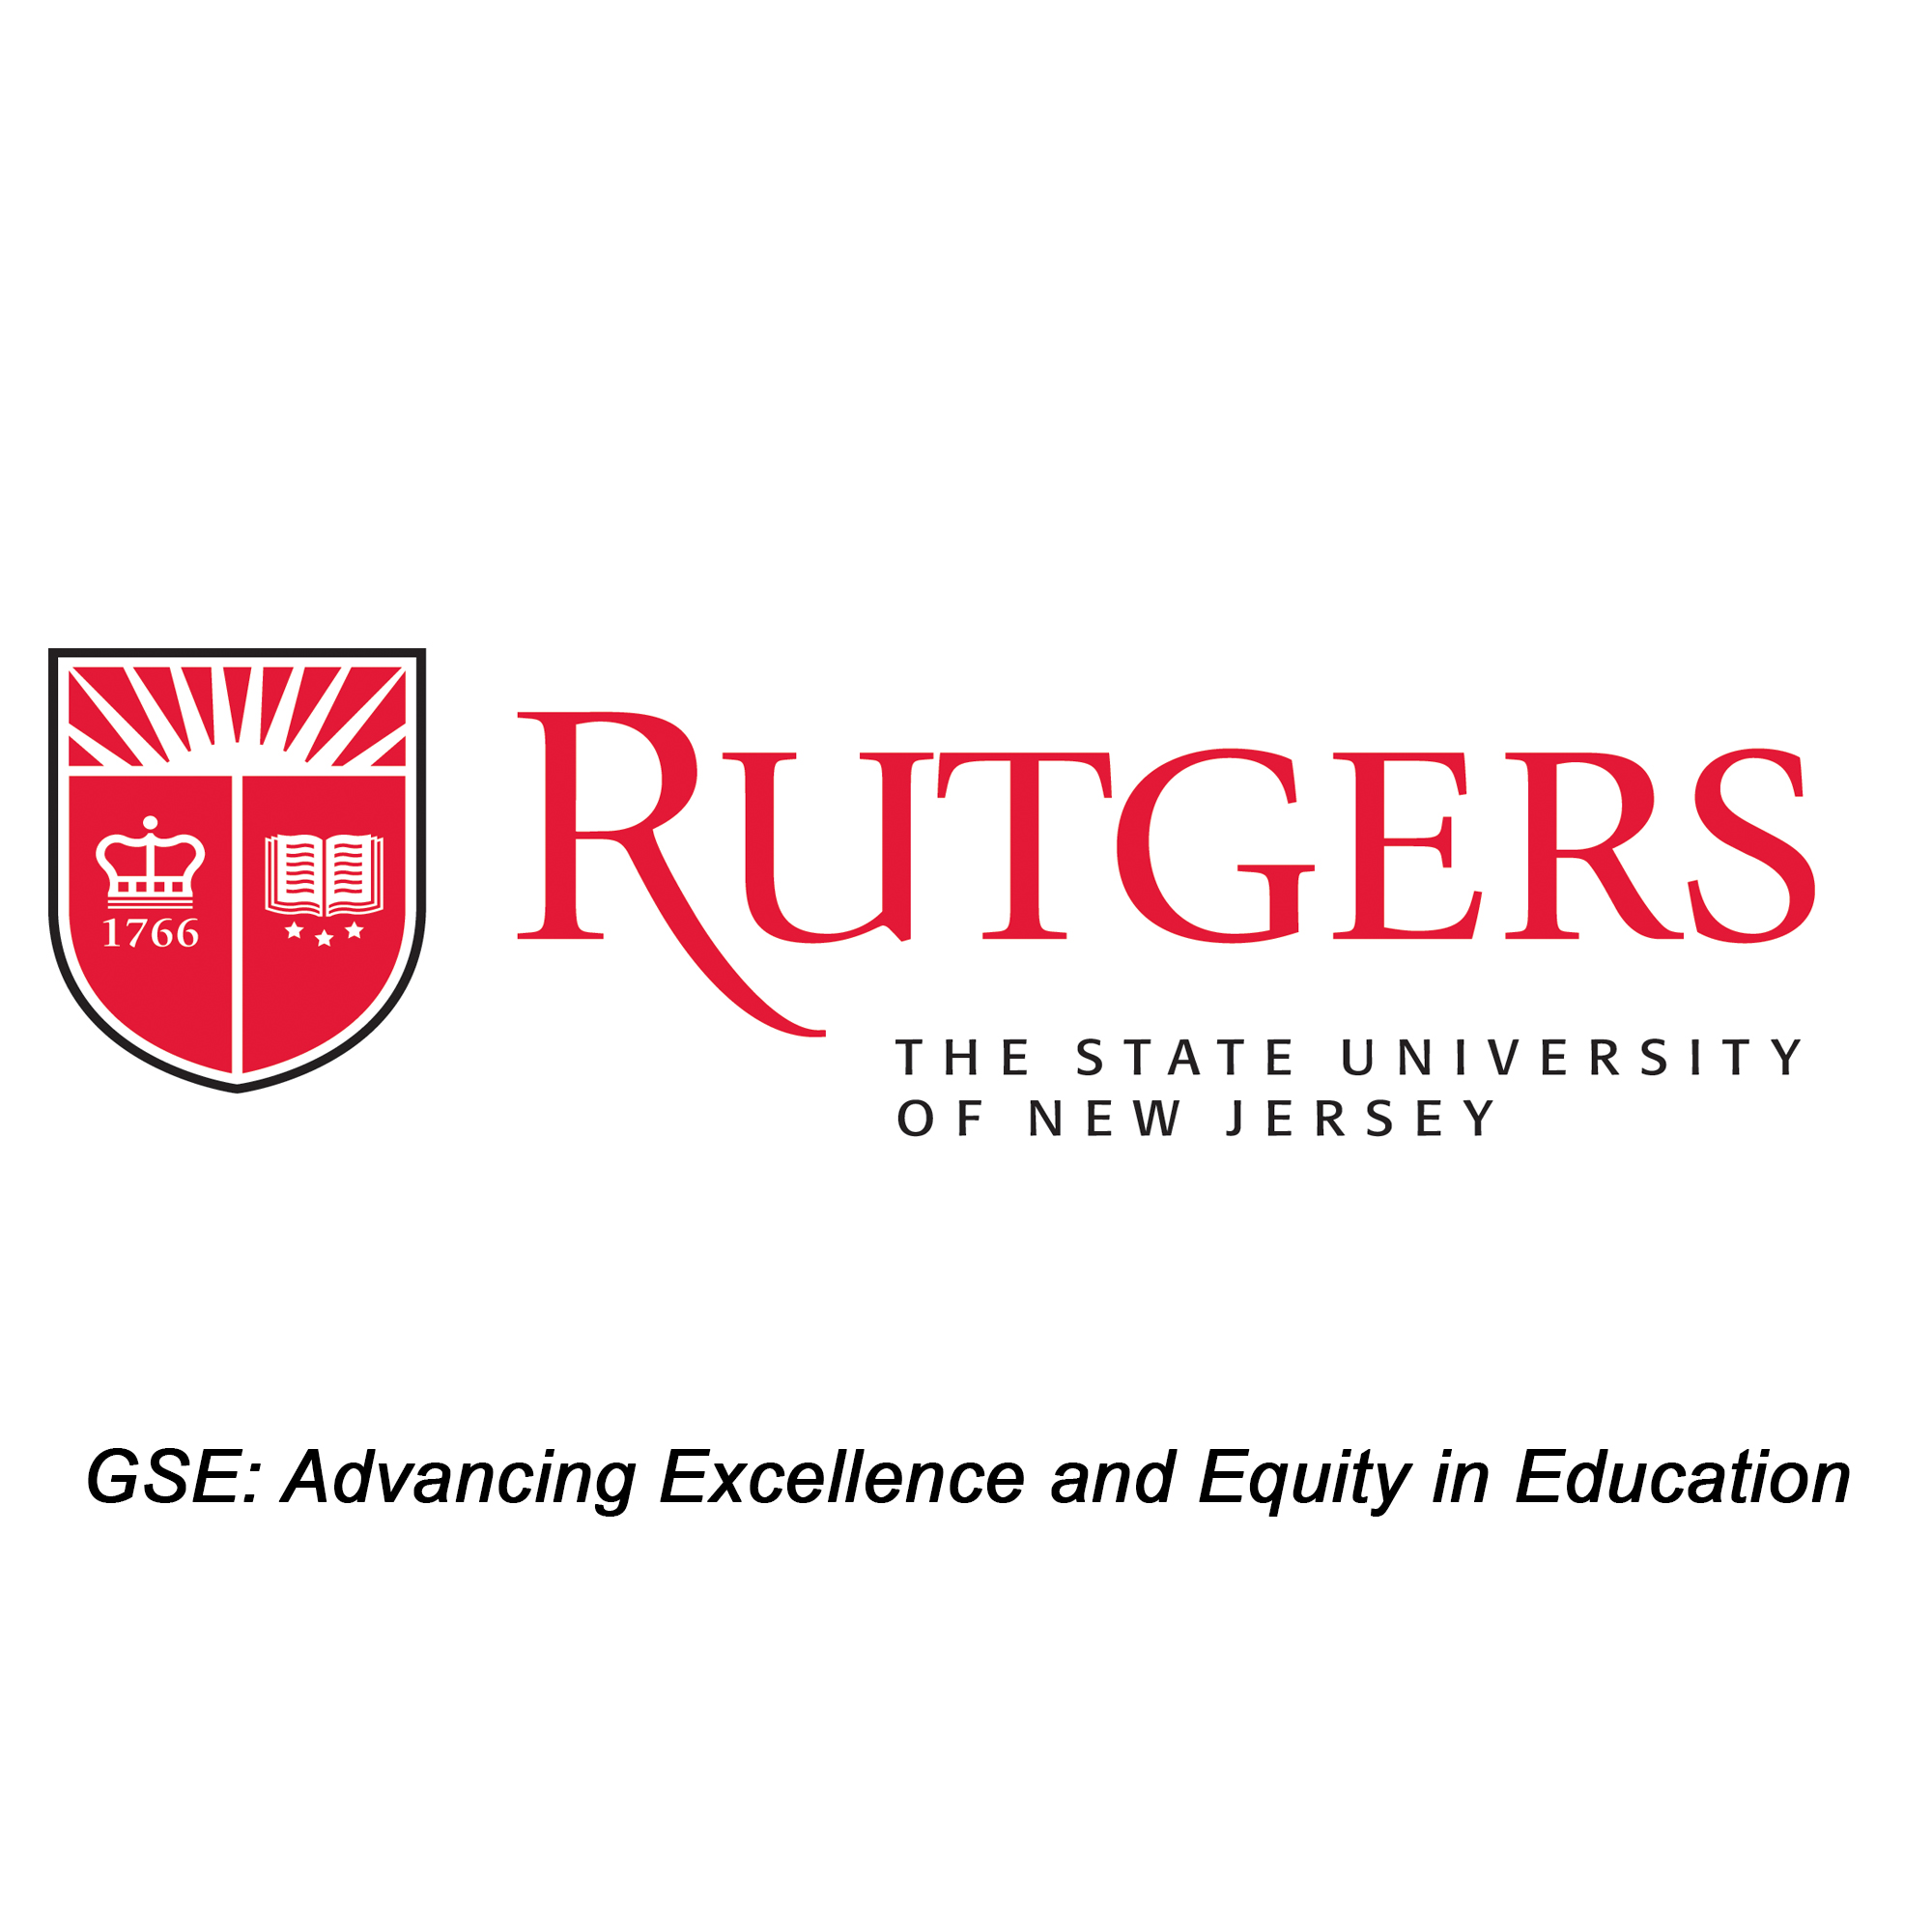 Toolbox - Rutgers GSE In Rutgers Powerpoint Template